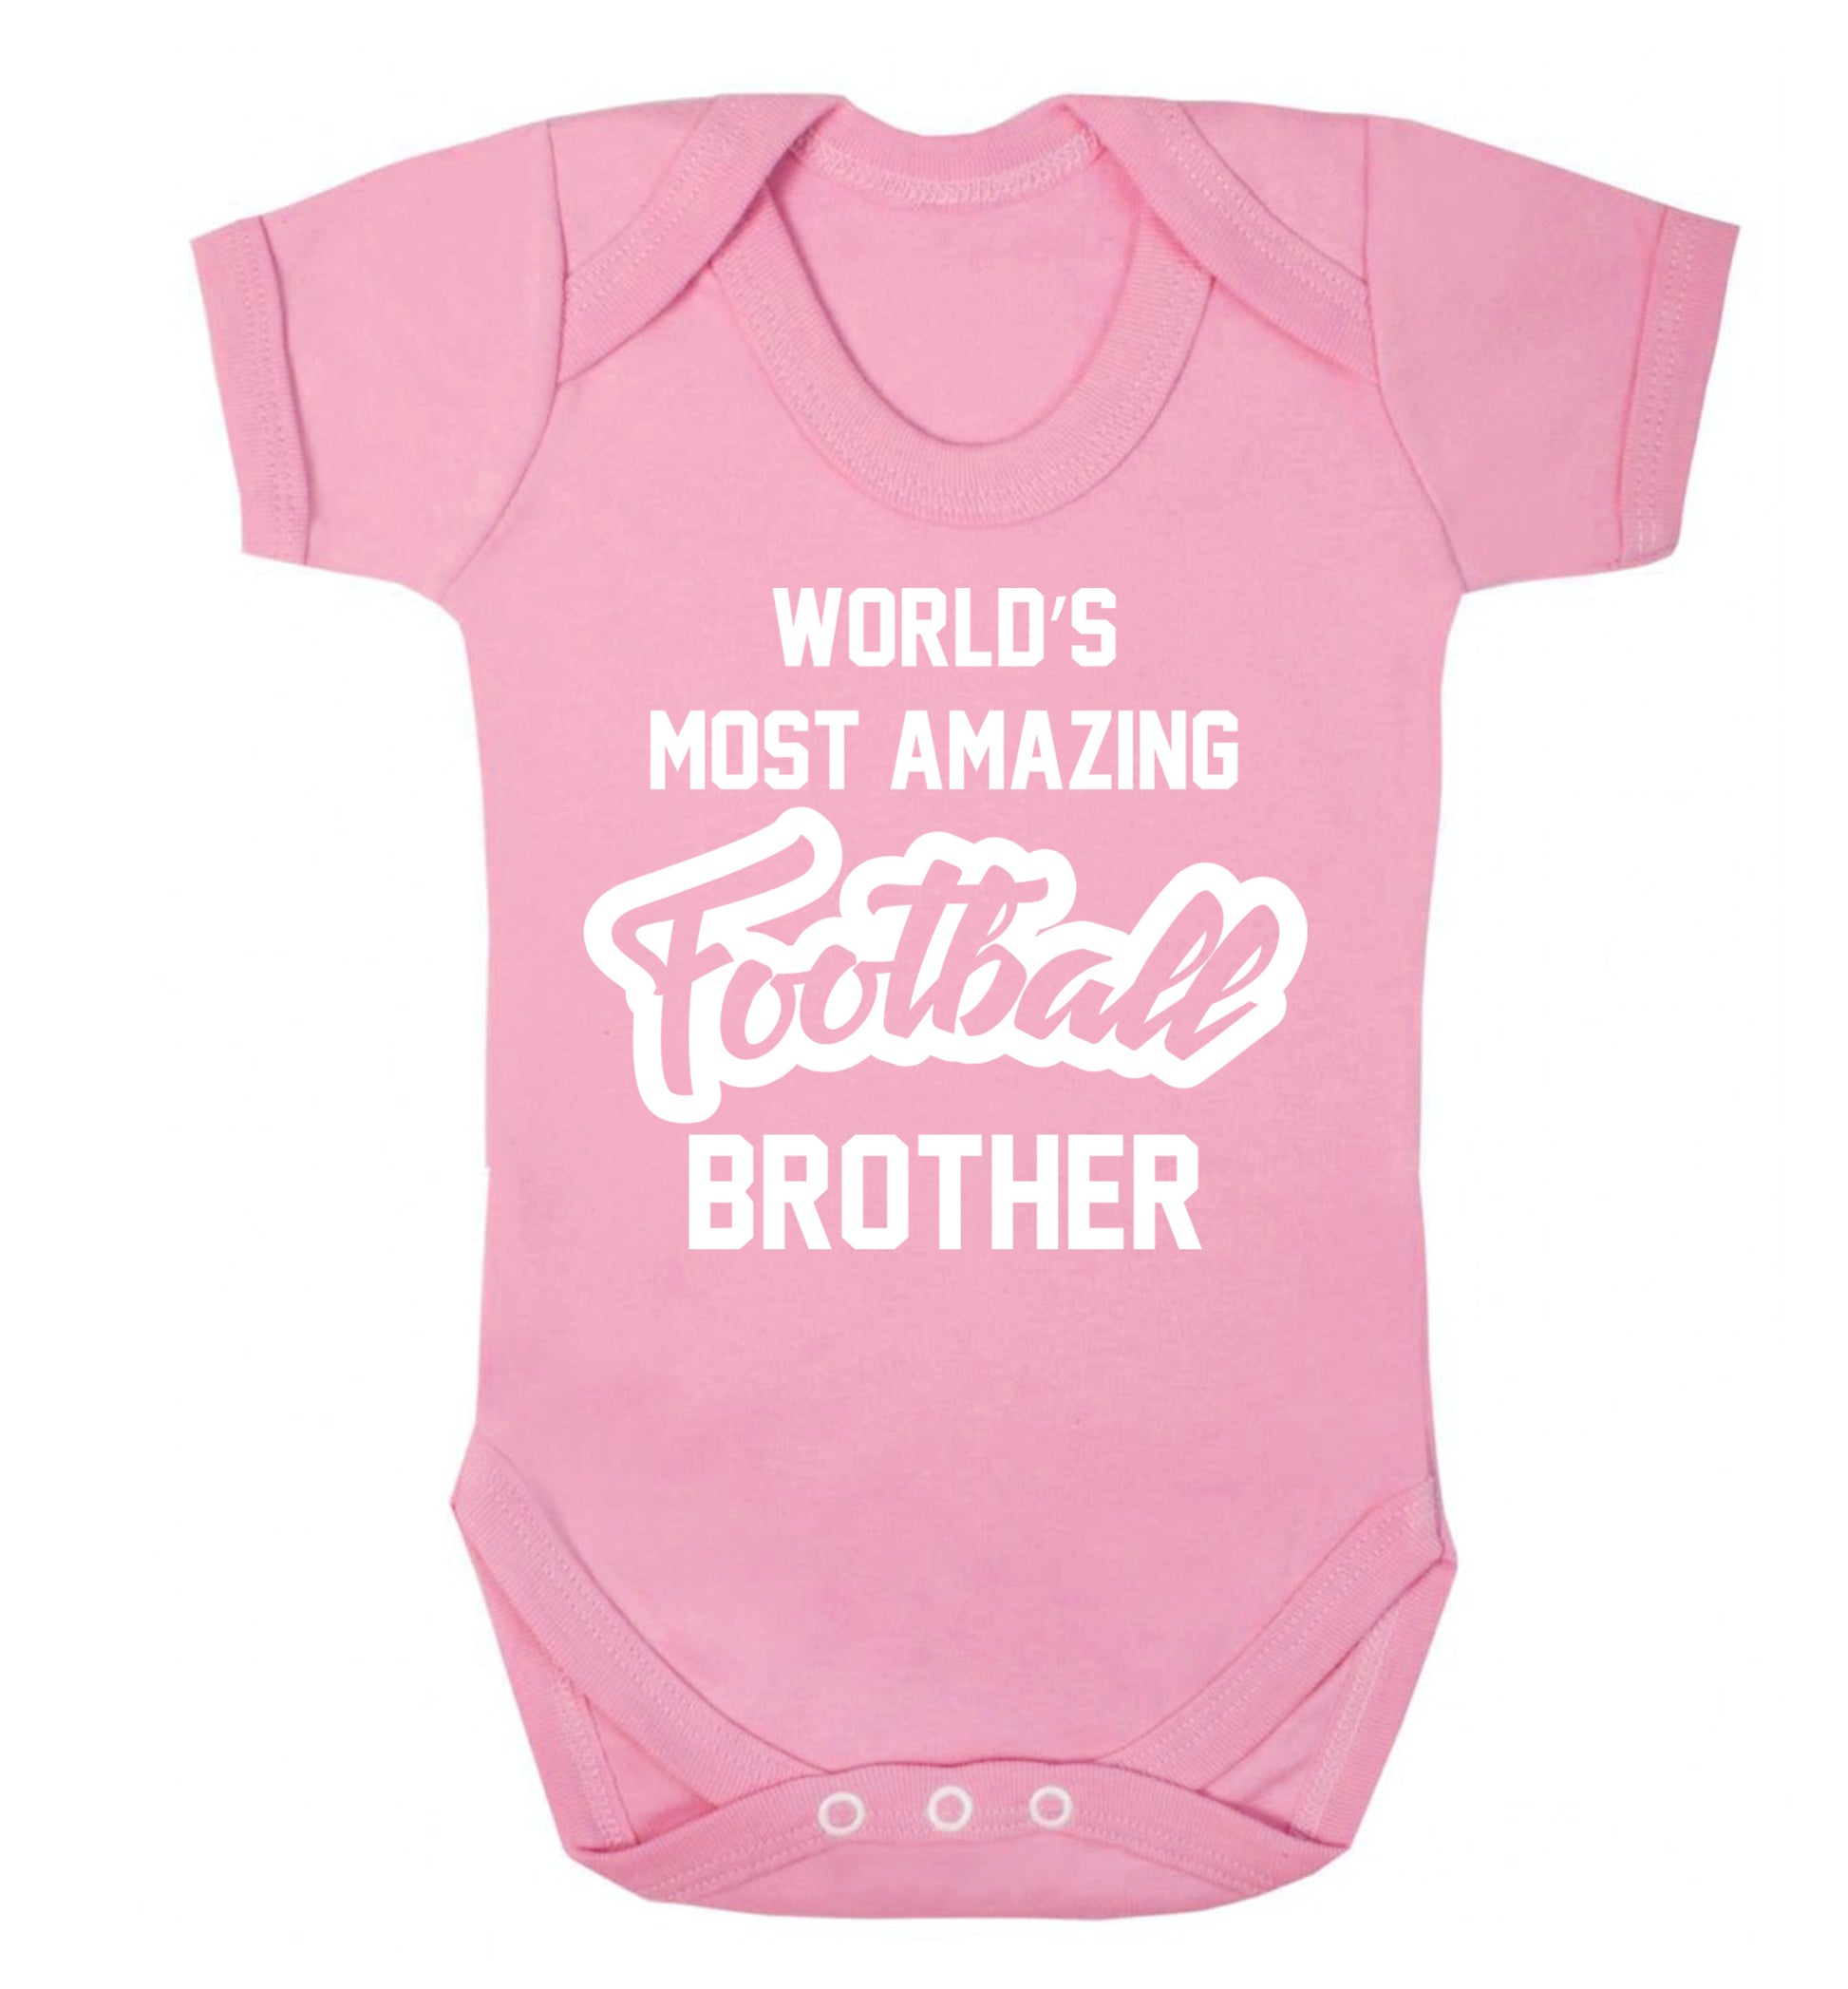 Worlds most amazing football brother Baby Vest pale pink 18-24 months